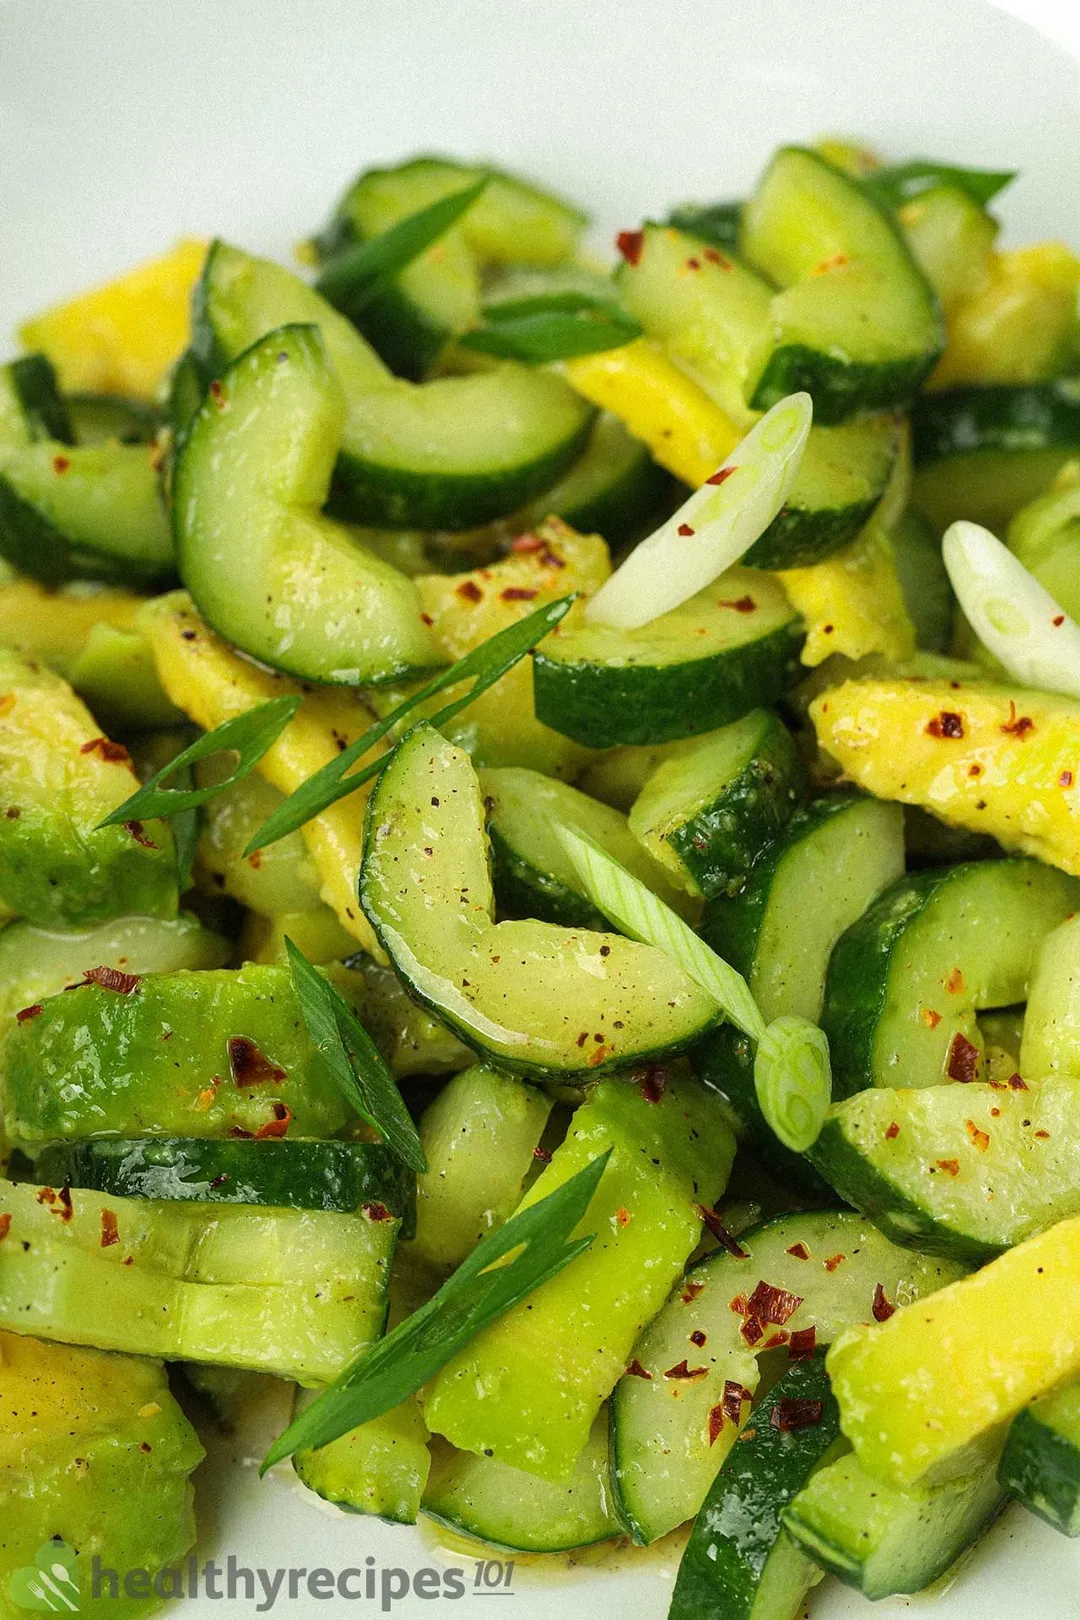 A close-up shot of half-moon sliced cucumbers, avocado cubes, dried pepper flakes, and chopped scallions